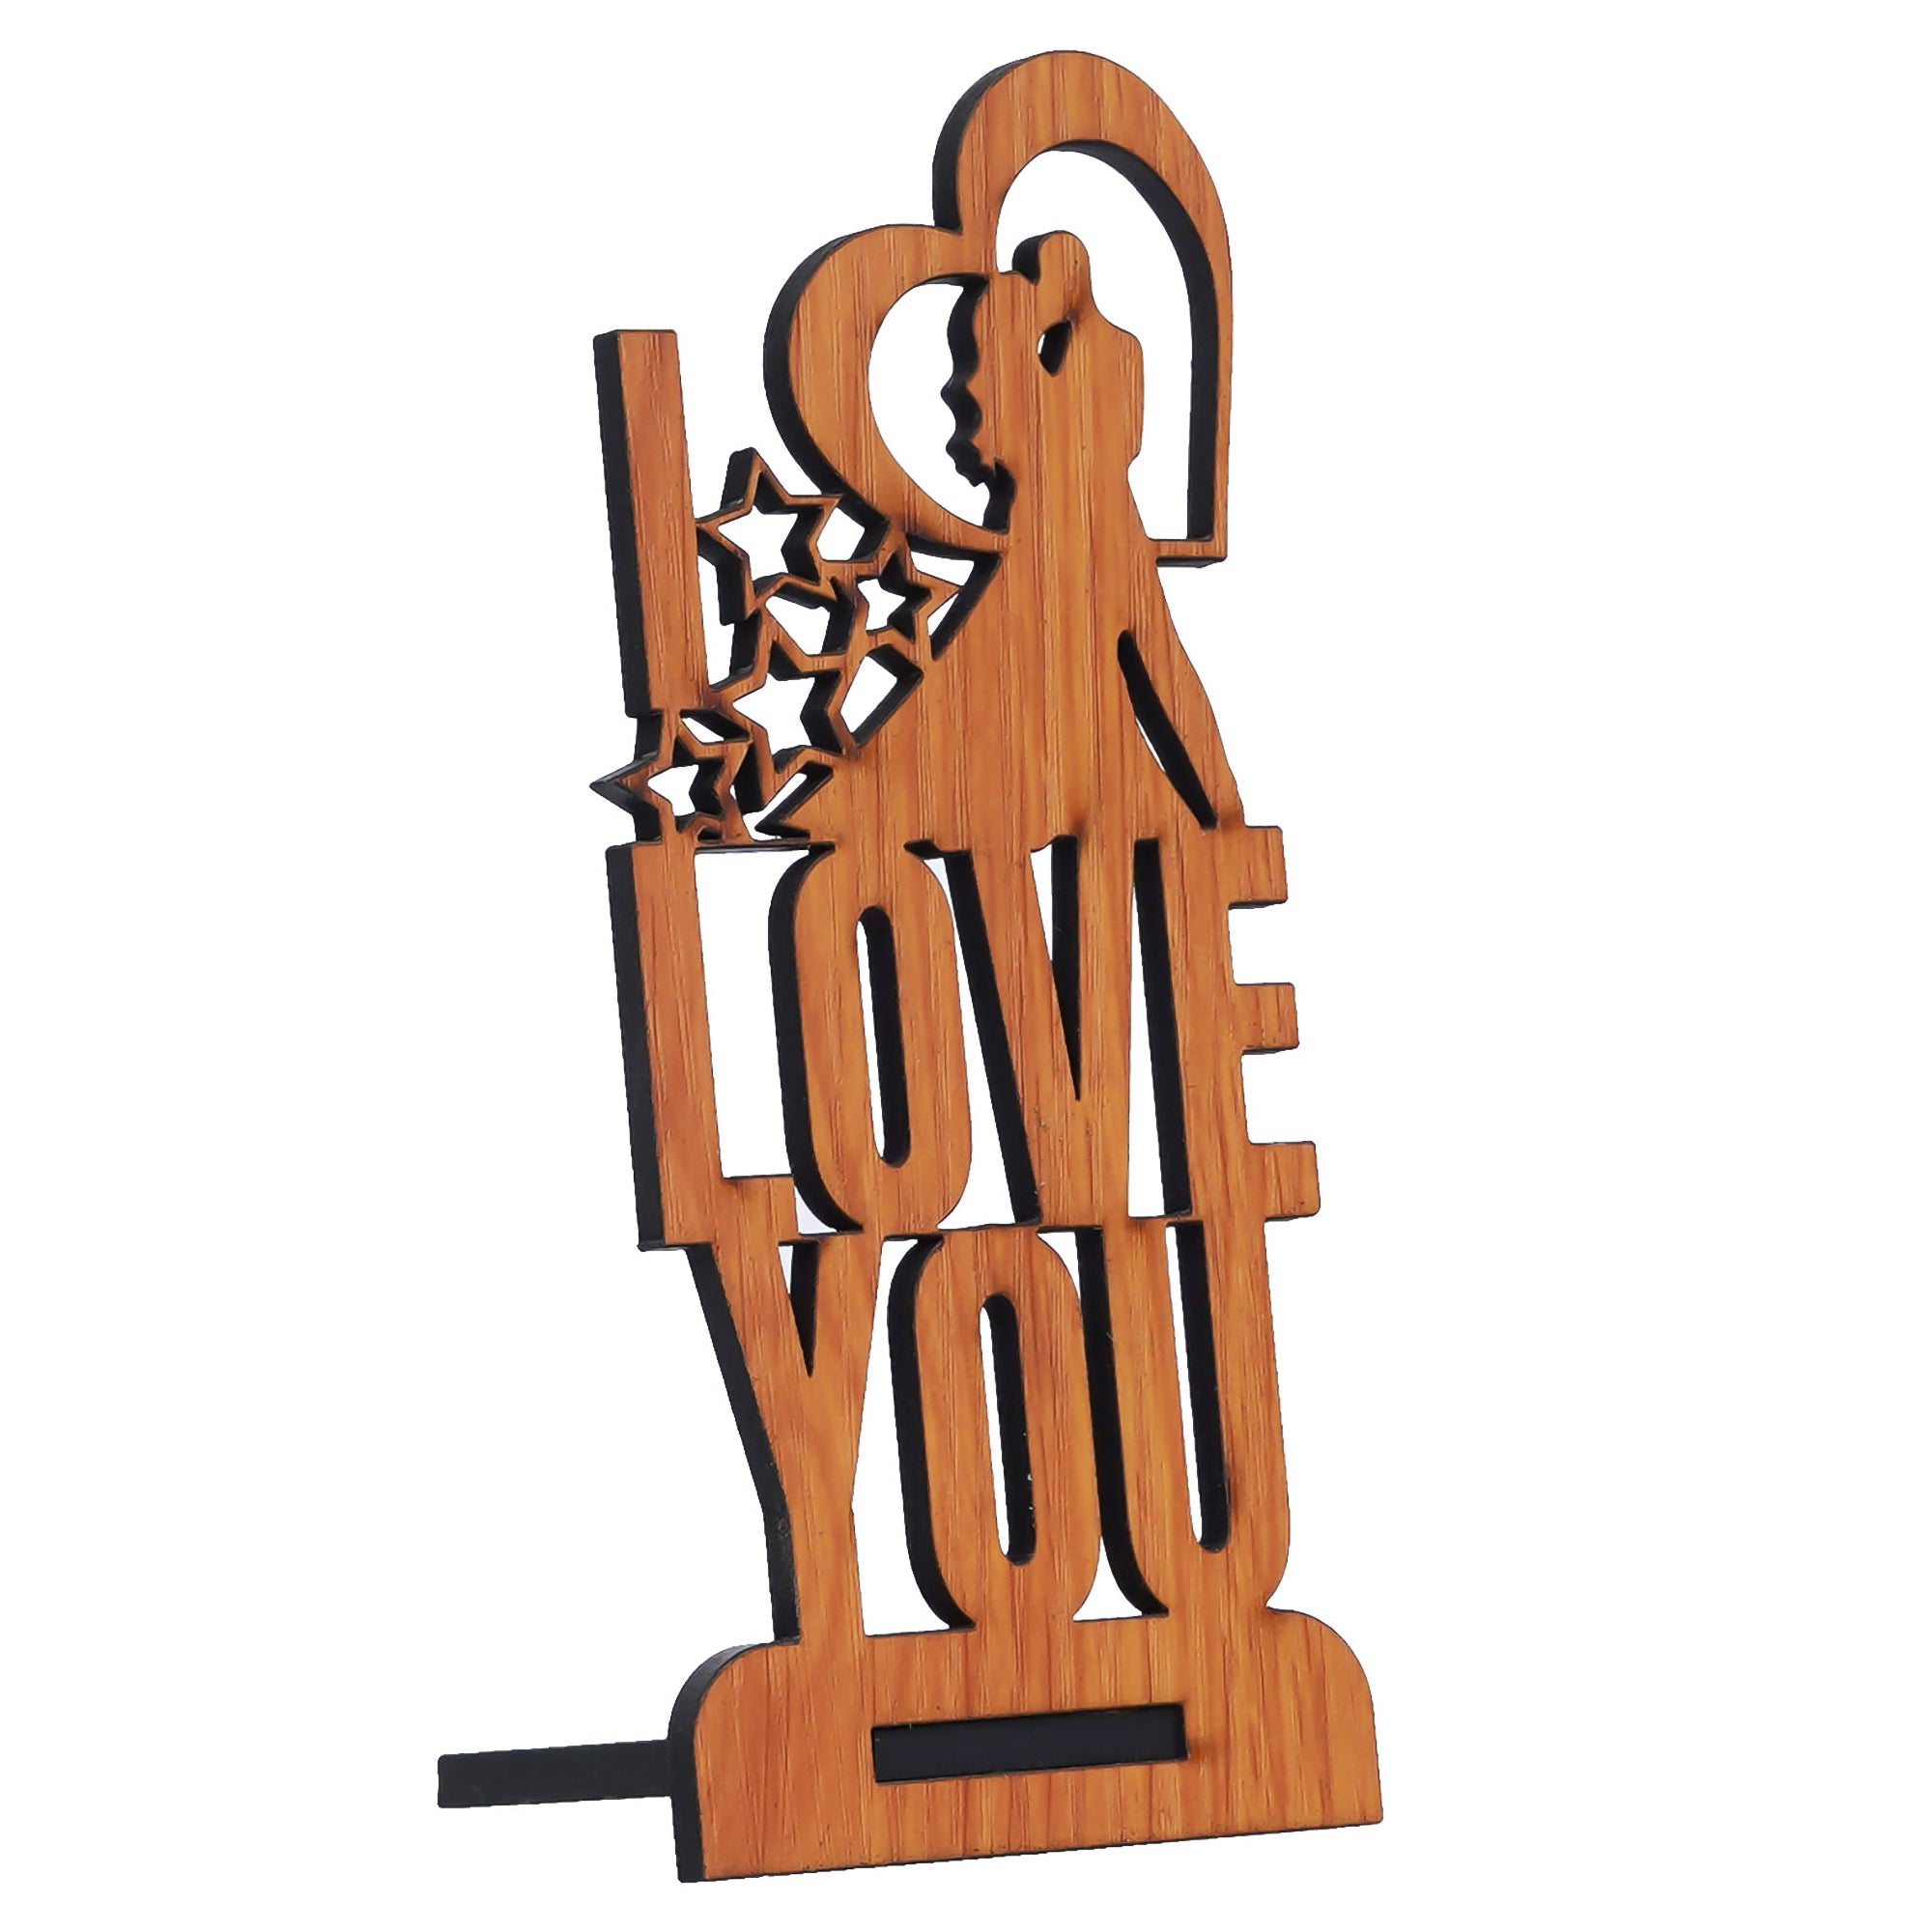 Valentine Combo of "Love You" Wooden Showpiece With Stand, Heart Shaped Gift Box Set with White Teddy and Red Roses 5